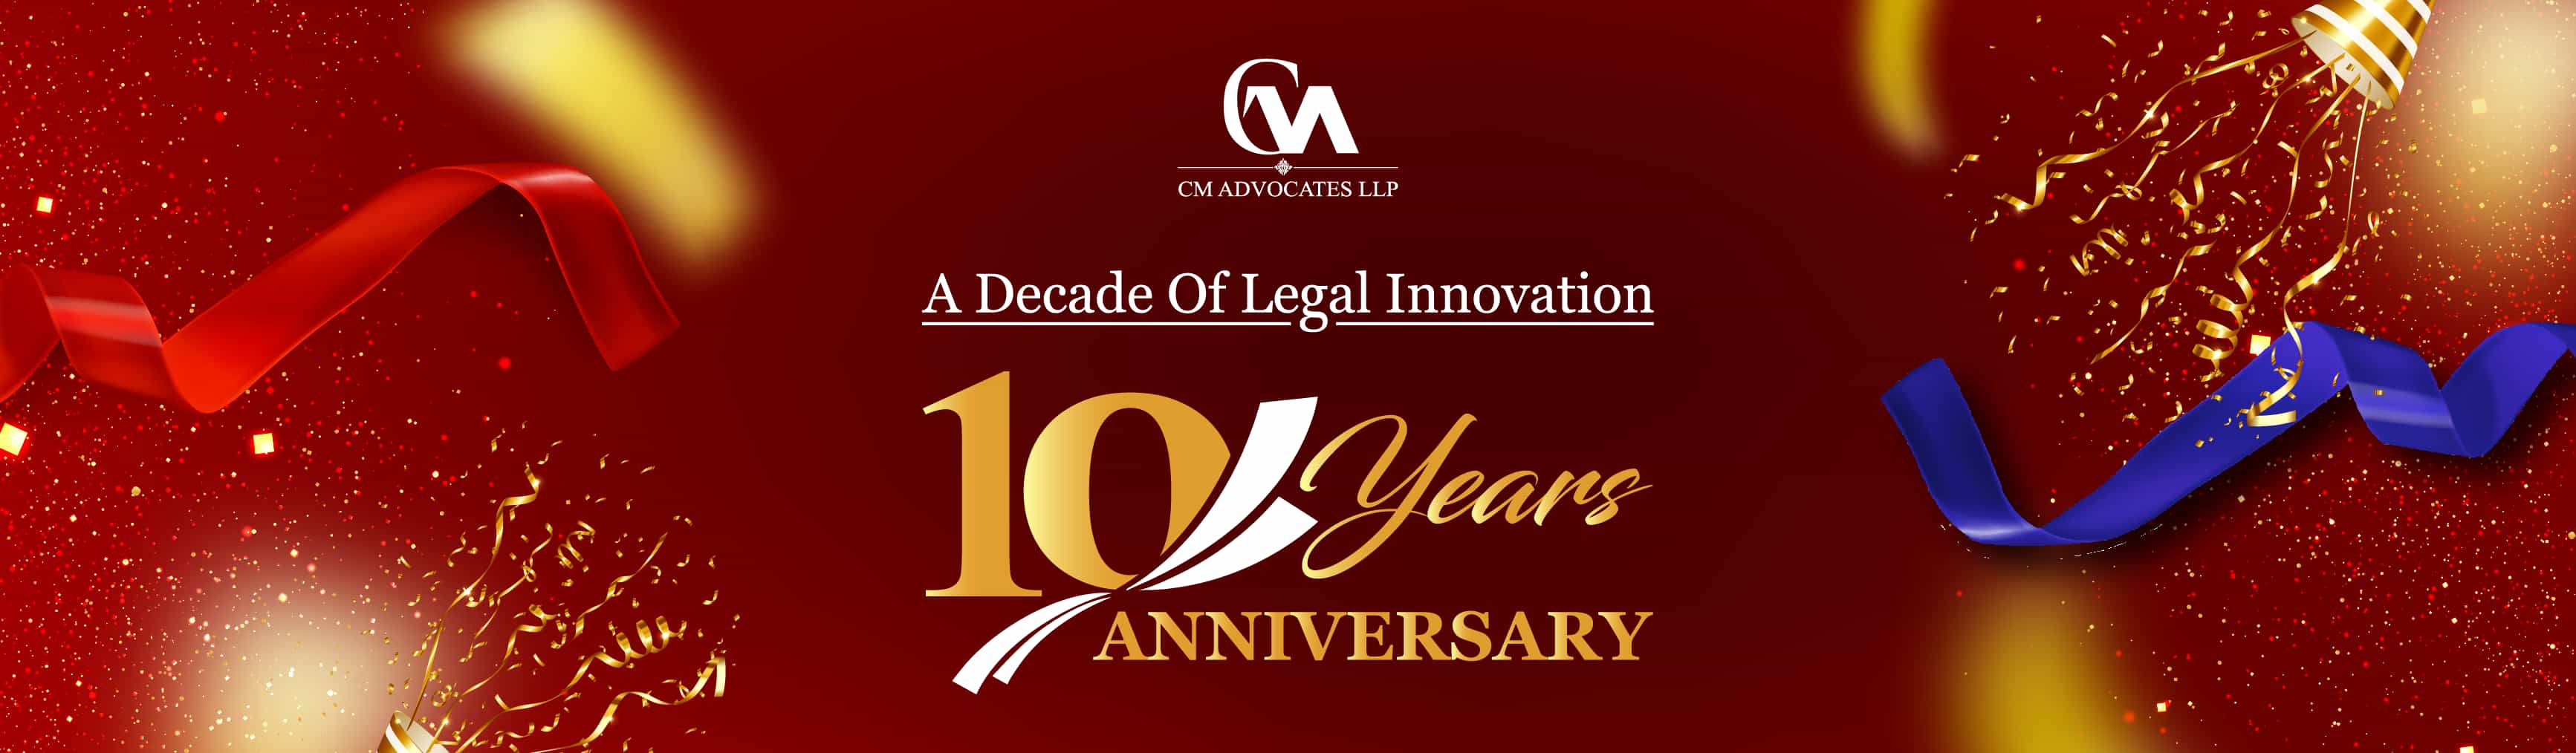 cm advocates at 10 years banner